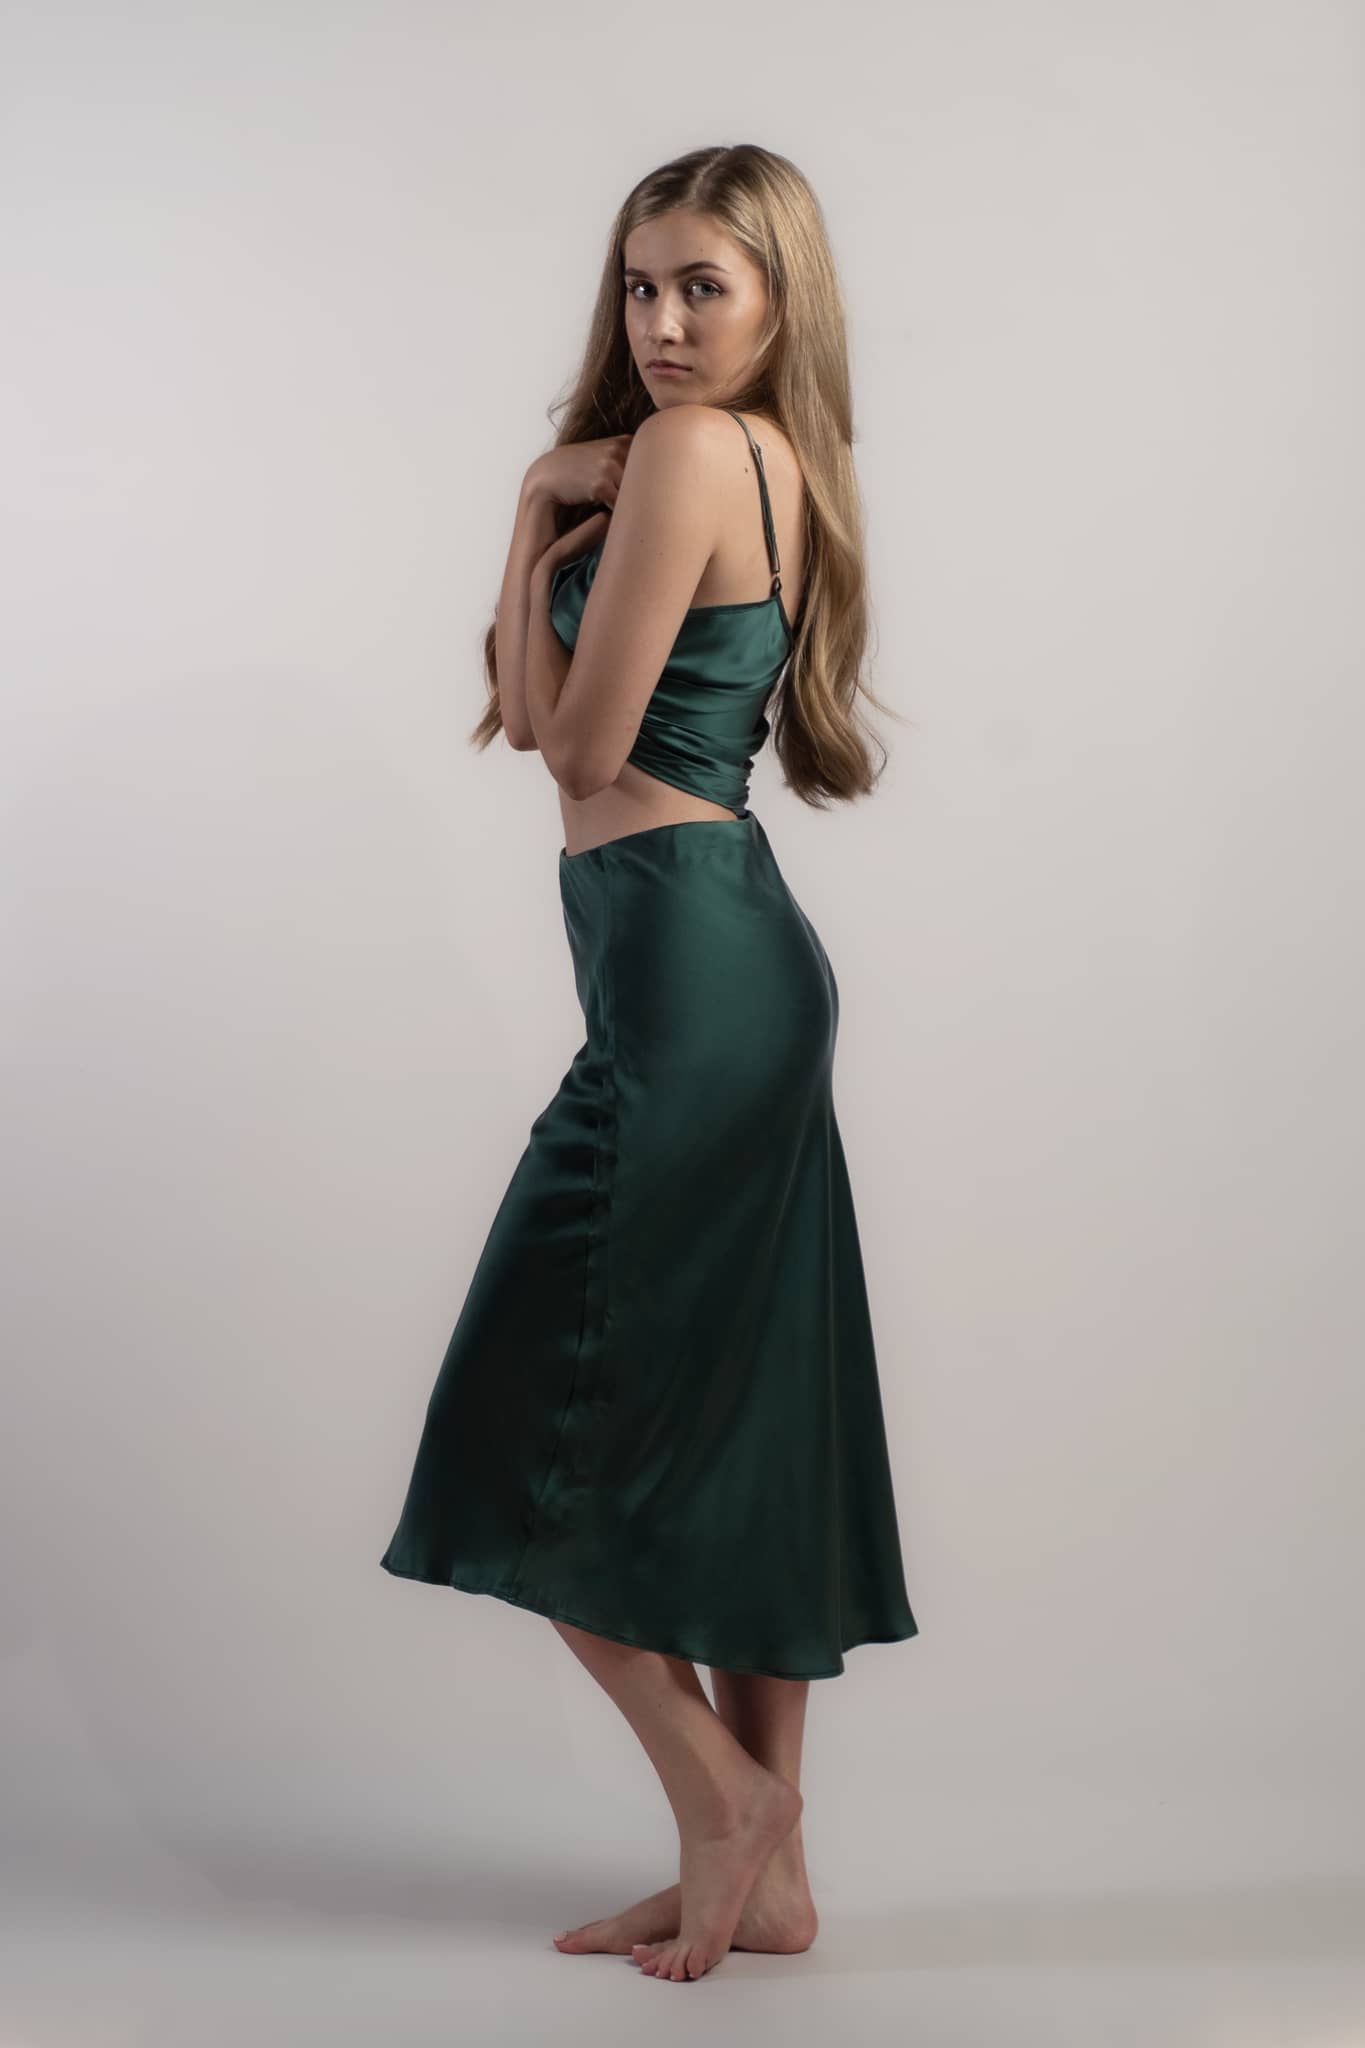 Woman wearing silk closet green skirt and camisole top. Side view